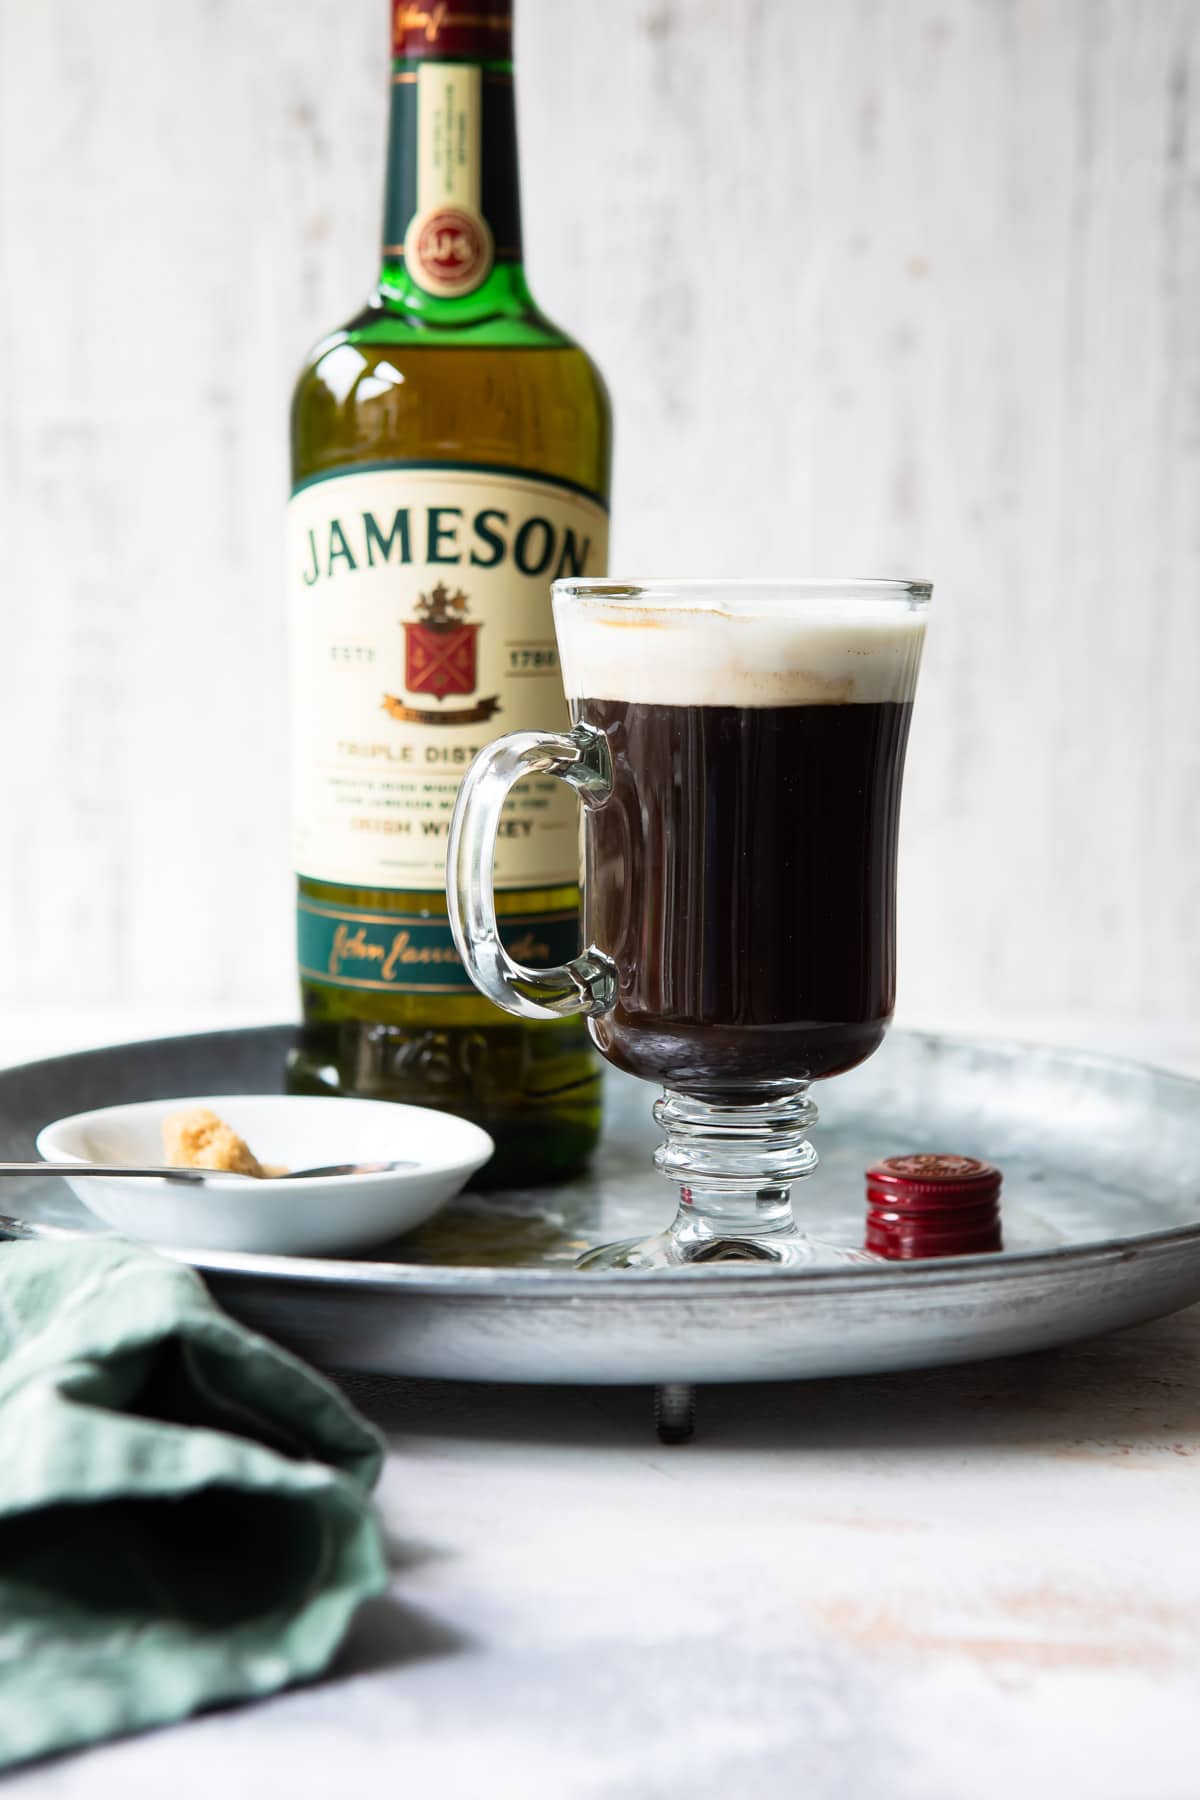 A tray with Irish Coffee and a bottle of Jameson Irish whiskey.